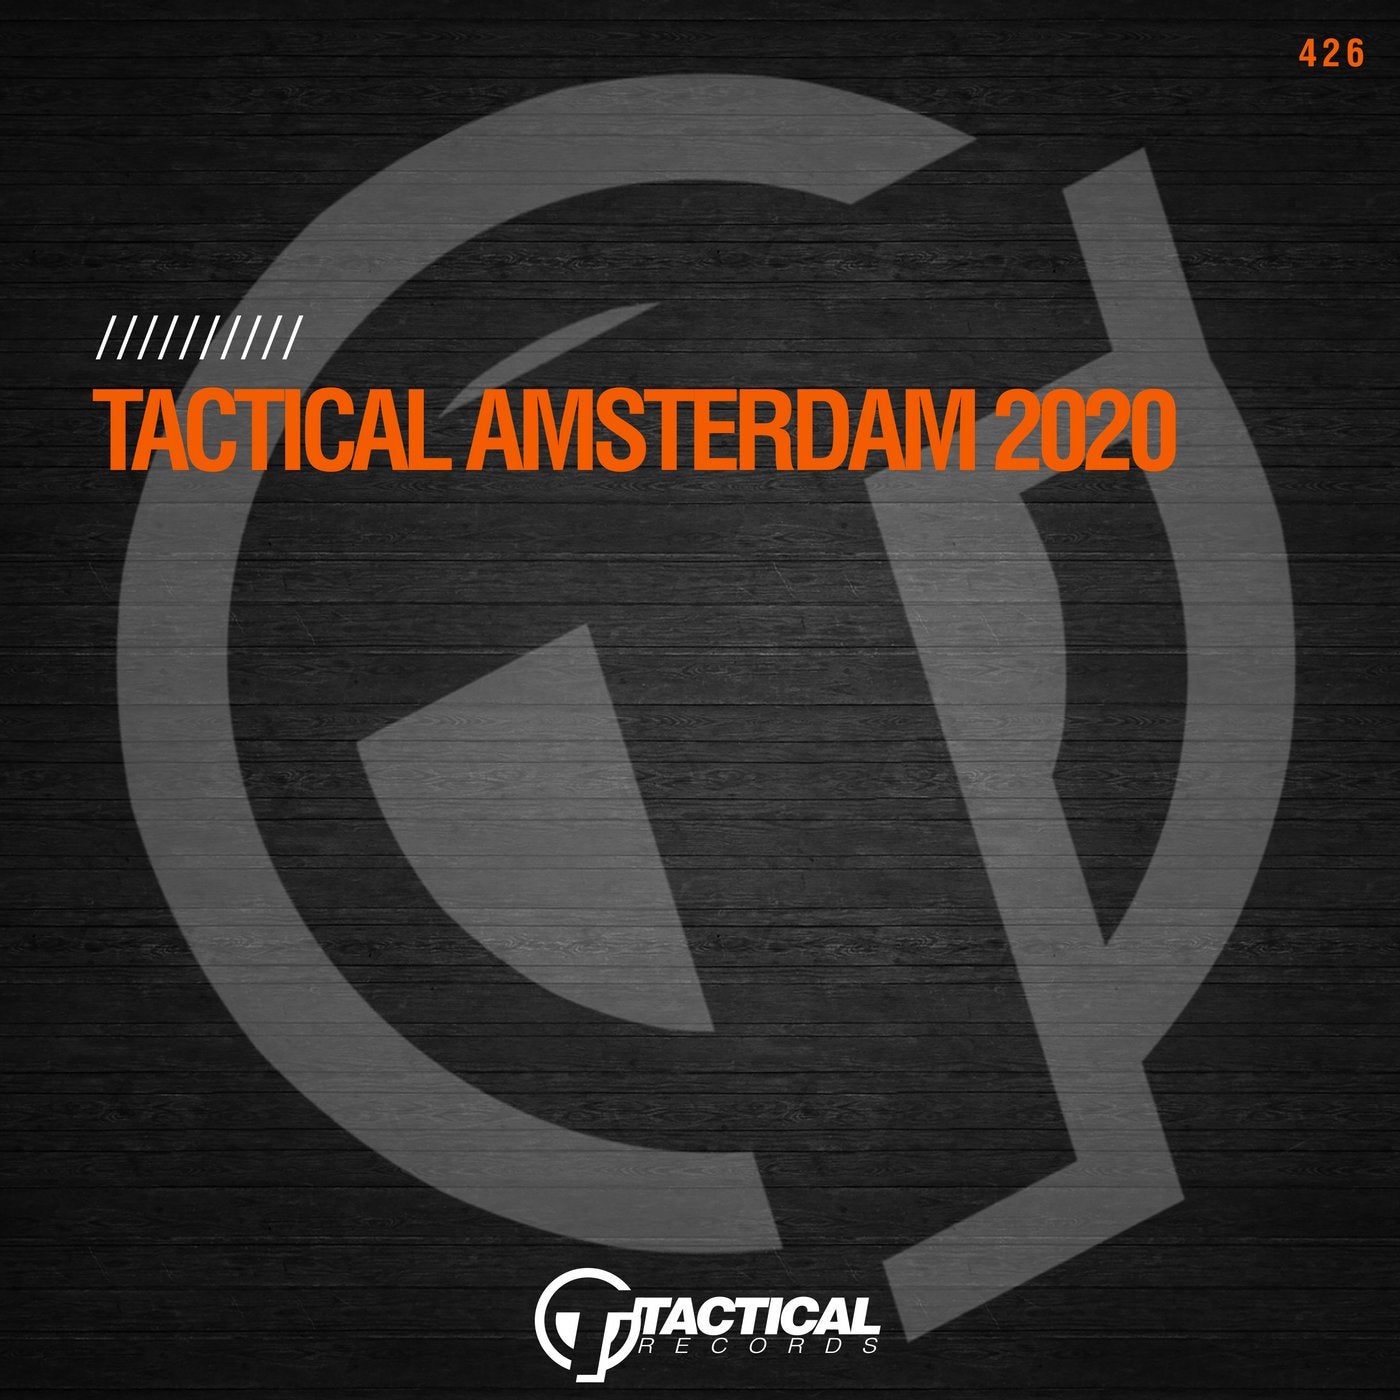 Tactical Amsterdam 2020